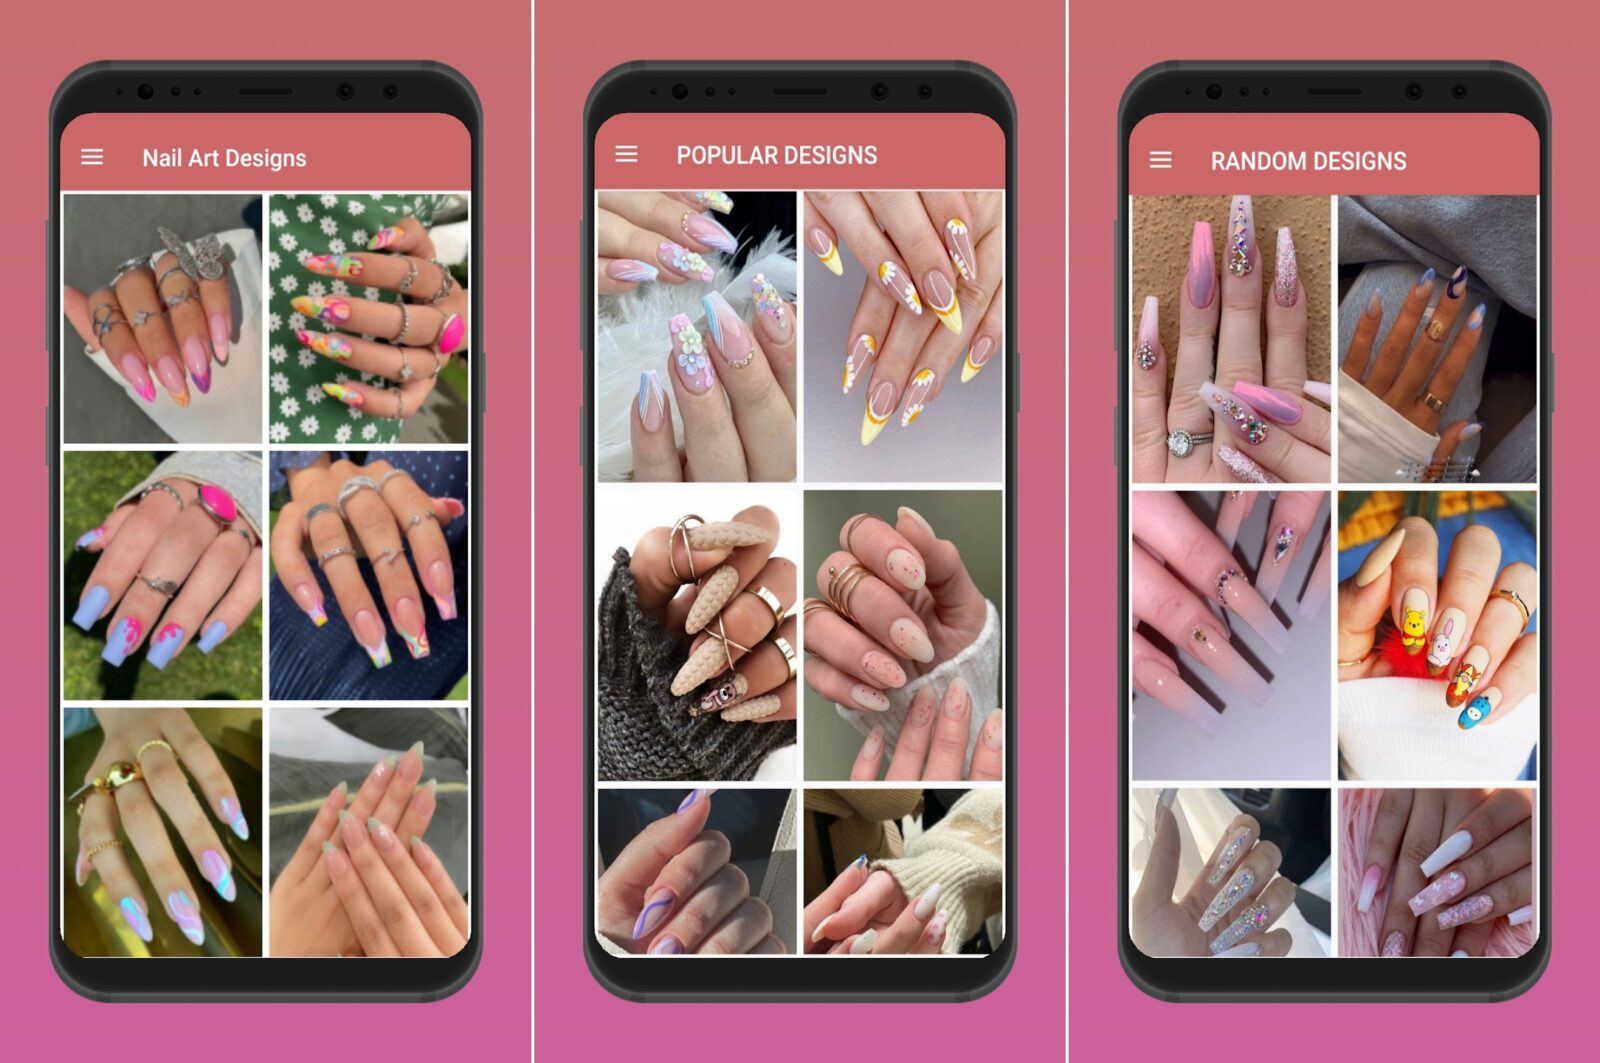 3. "Nail Art Master: Beauty Game" - wide 6